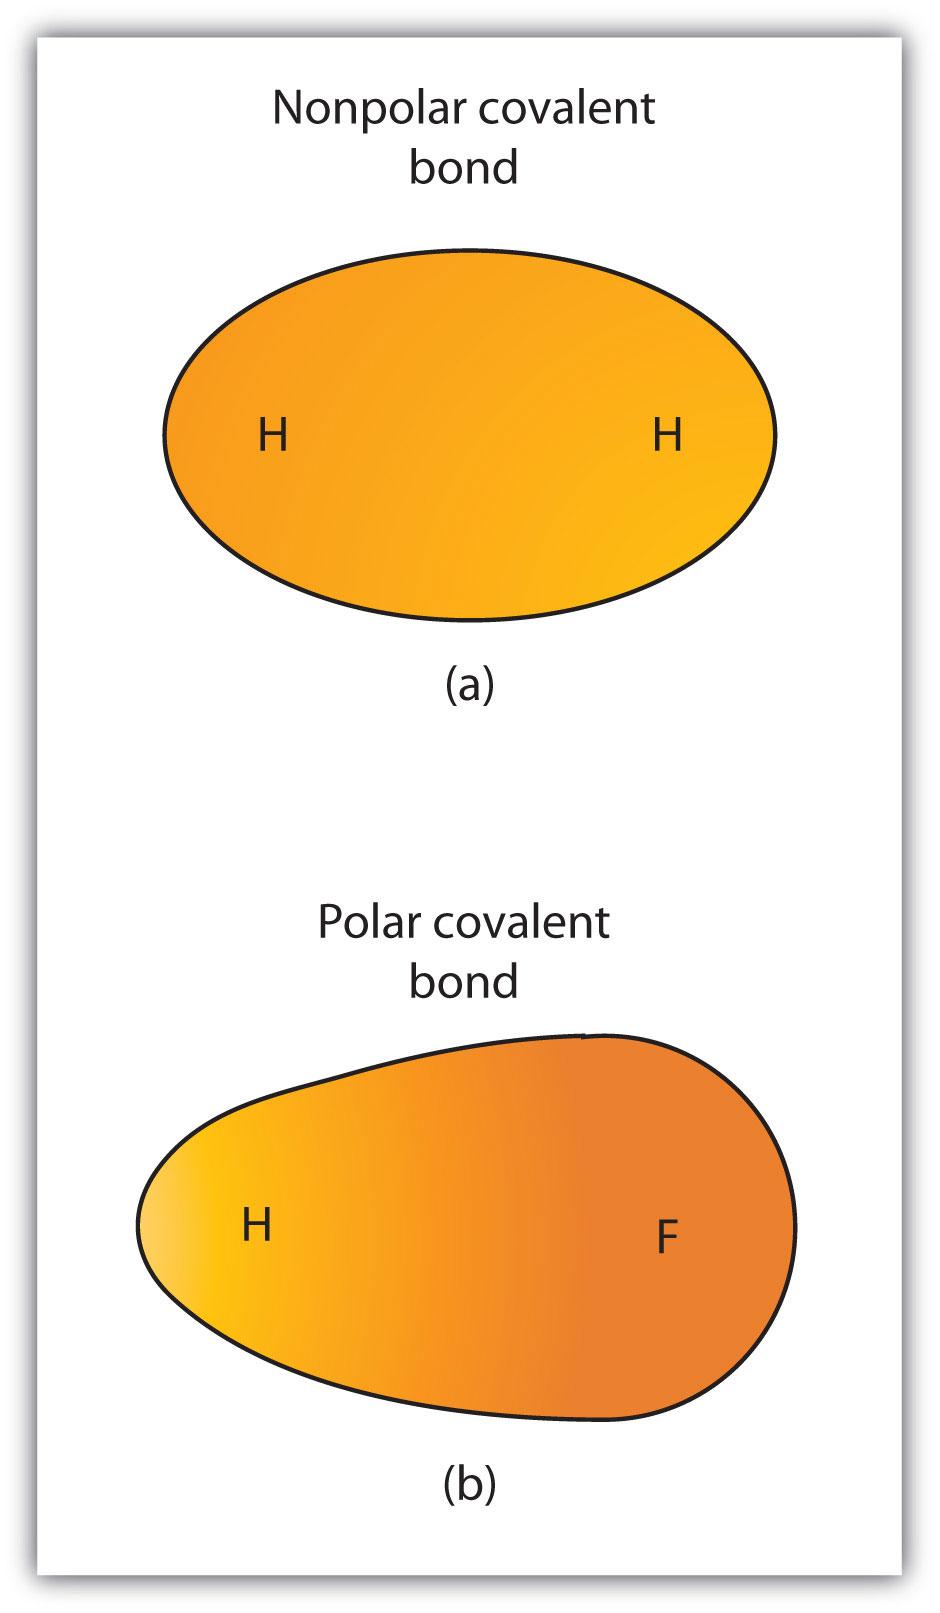 (a) The electrons in the covalent bond are equally shared by both hydrogen atoms. This is a nonpolar covalent bond.